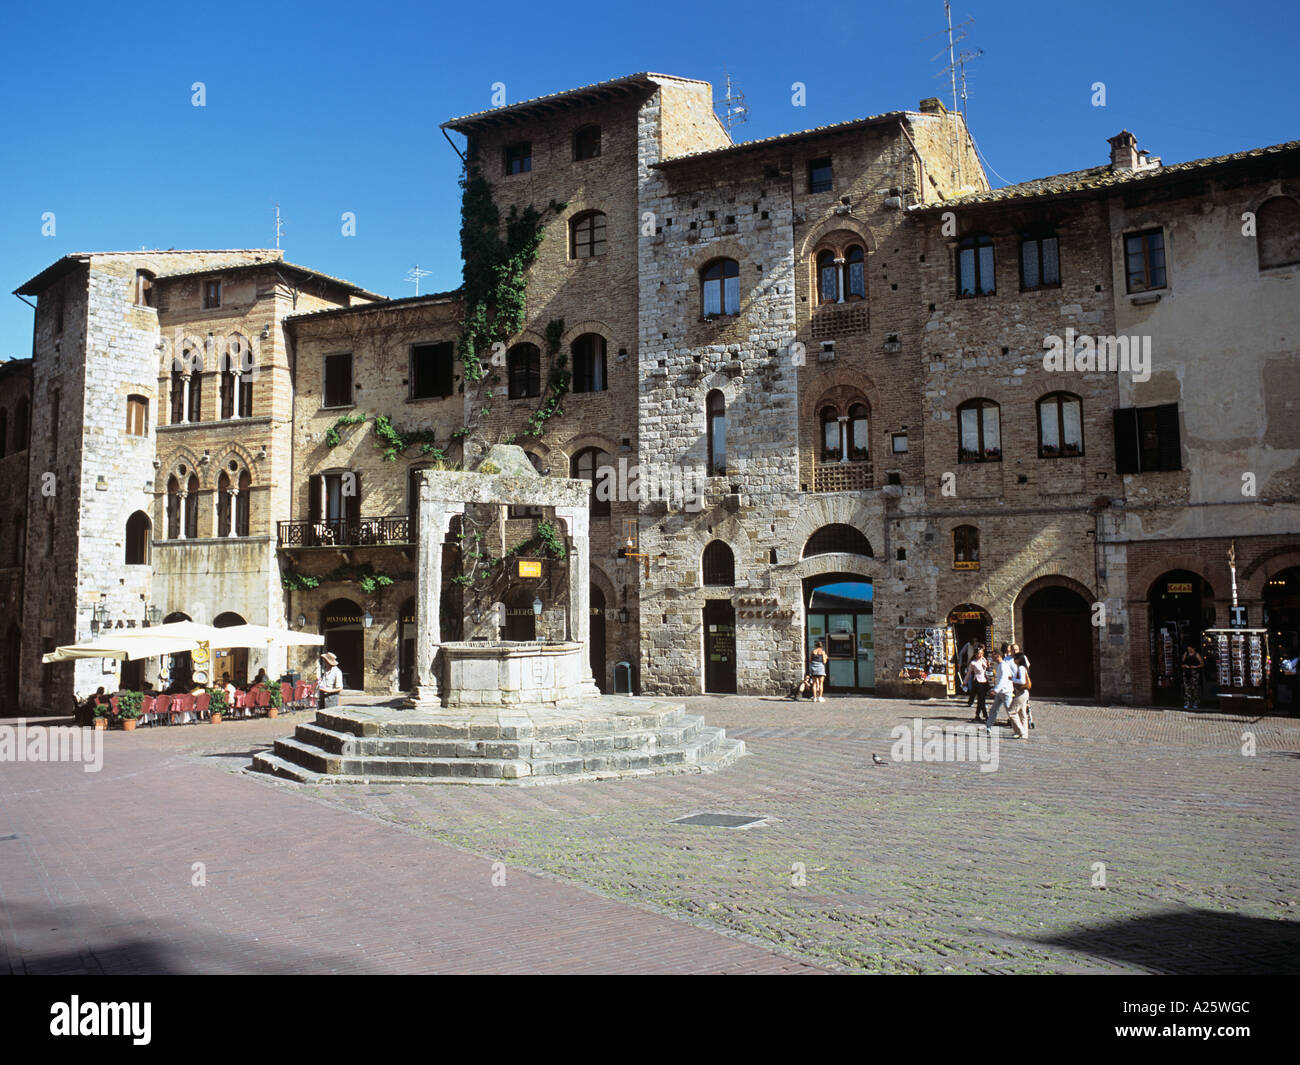 San Gimignano Siena Tuscany Italy 13th CENTURY TOWN WELL in Piazza ...